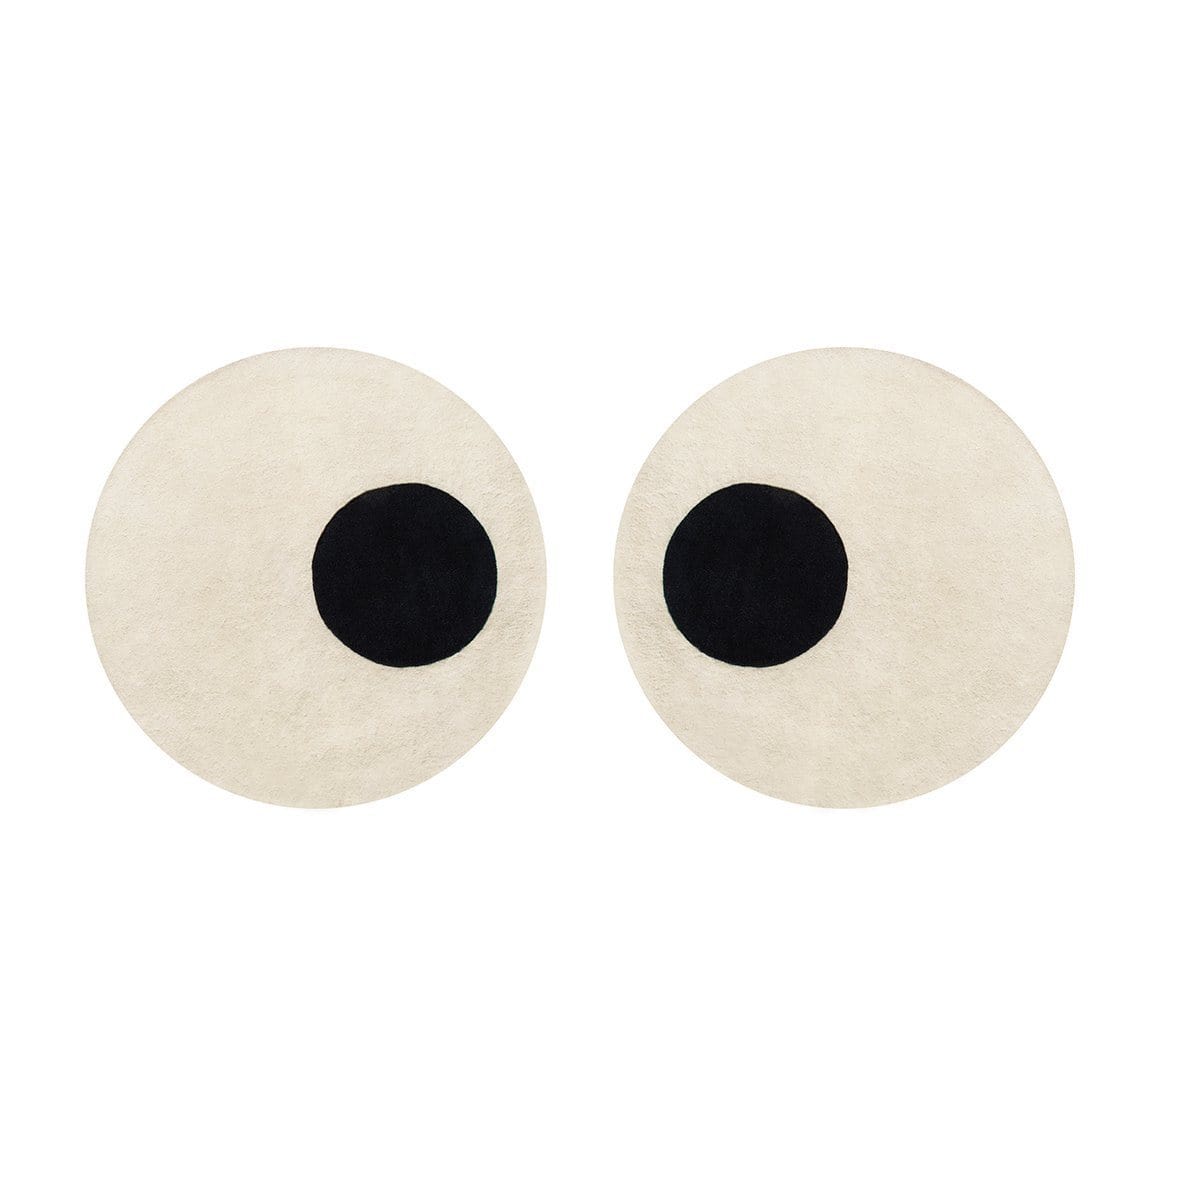 Rugs by Roo | Maison Deux Eyes Area Rug-MAISON-EYE